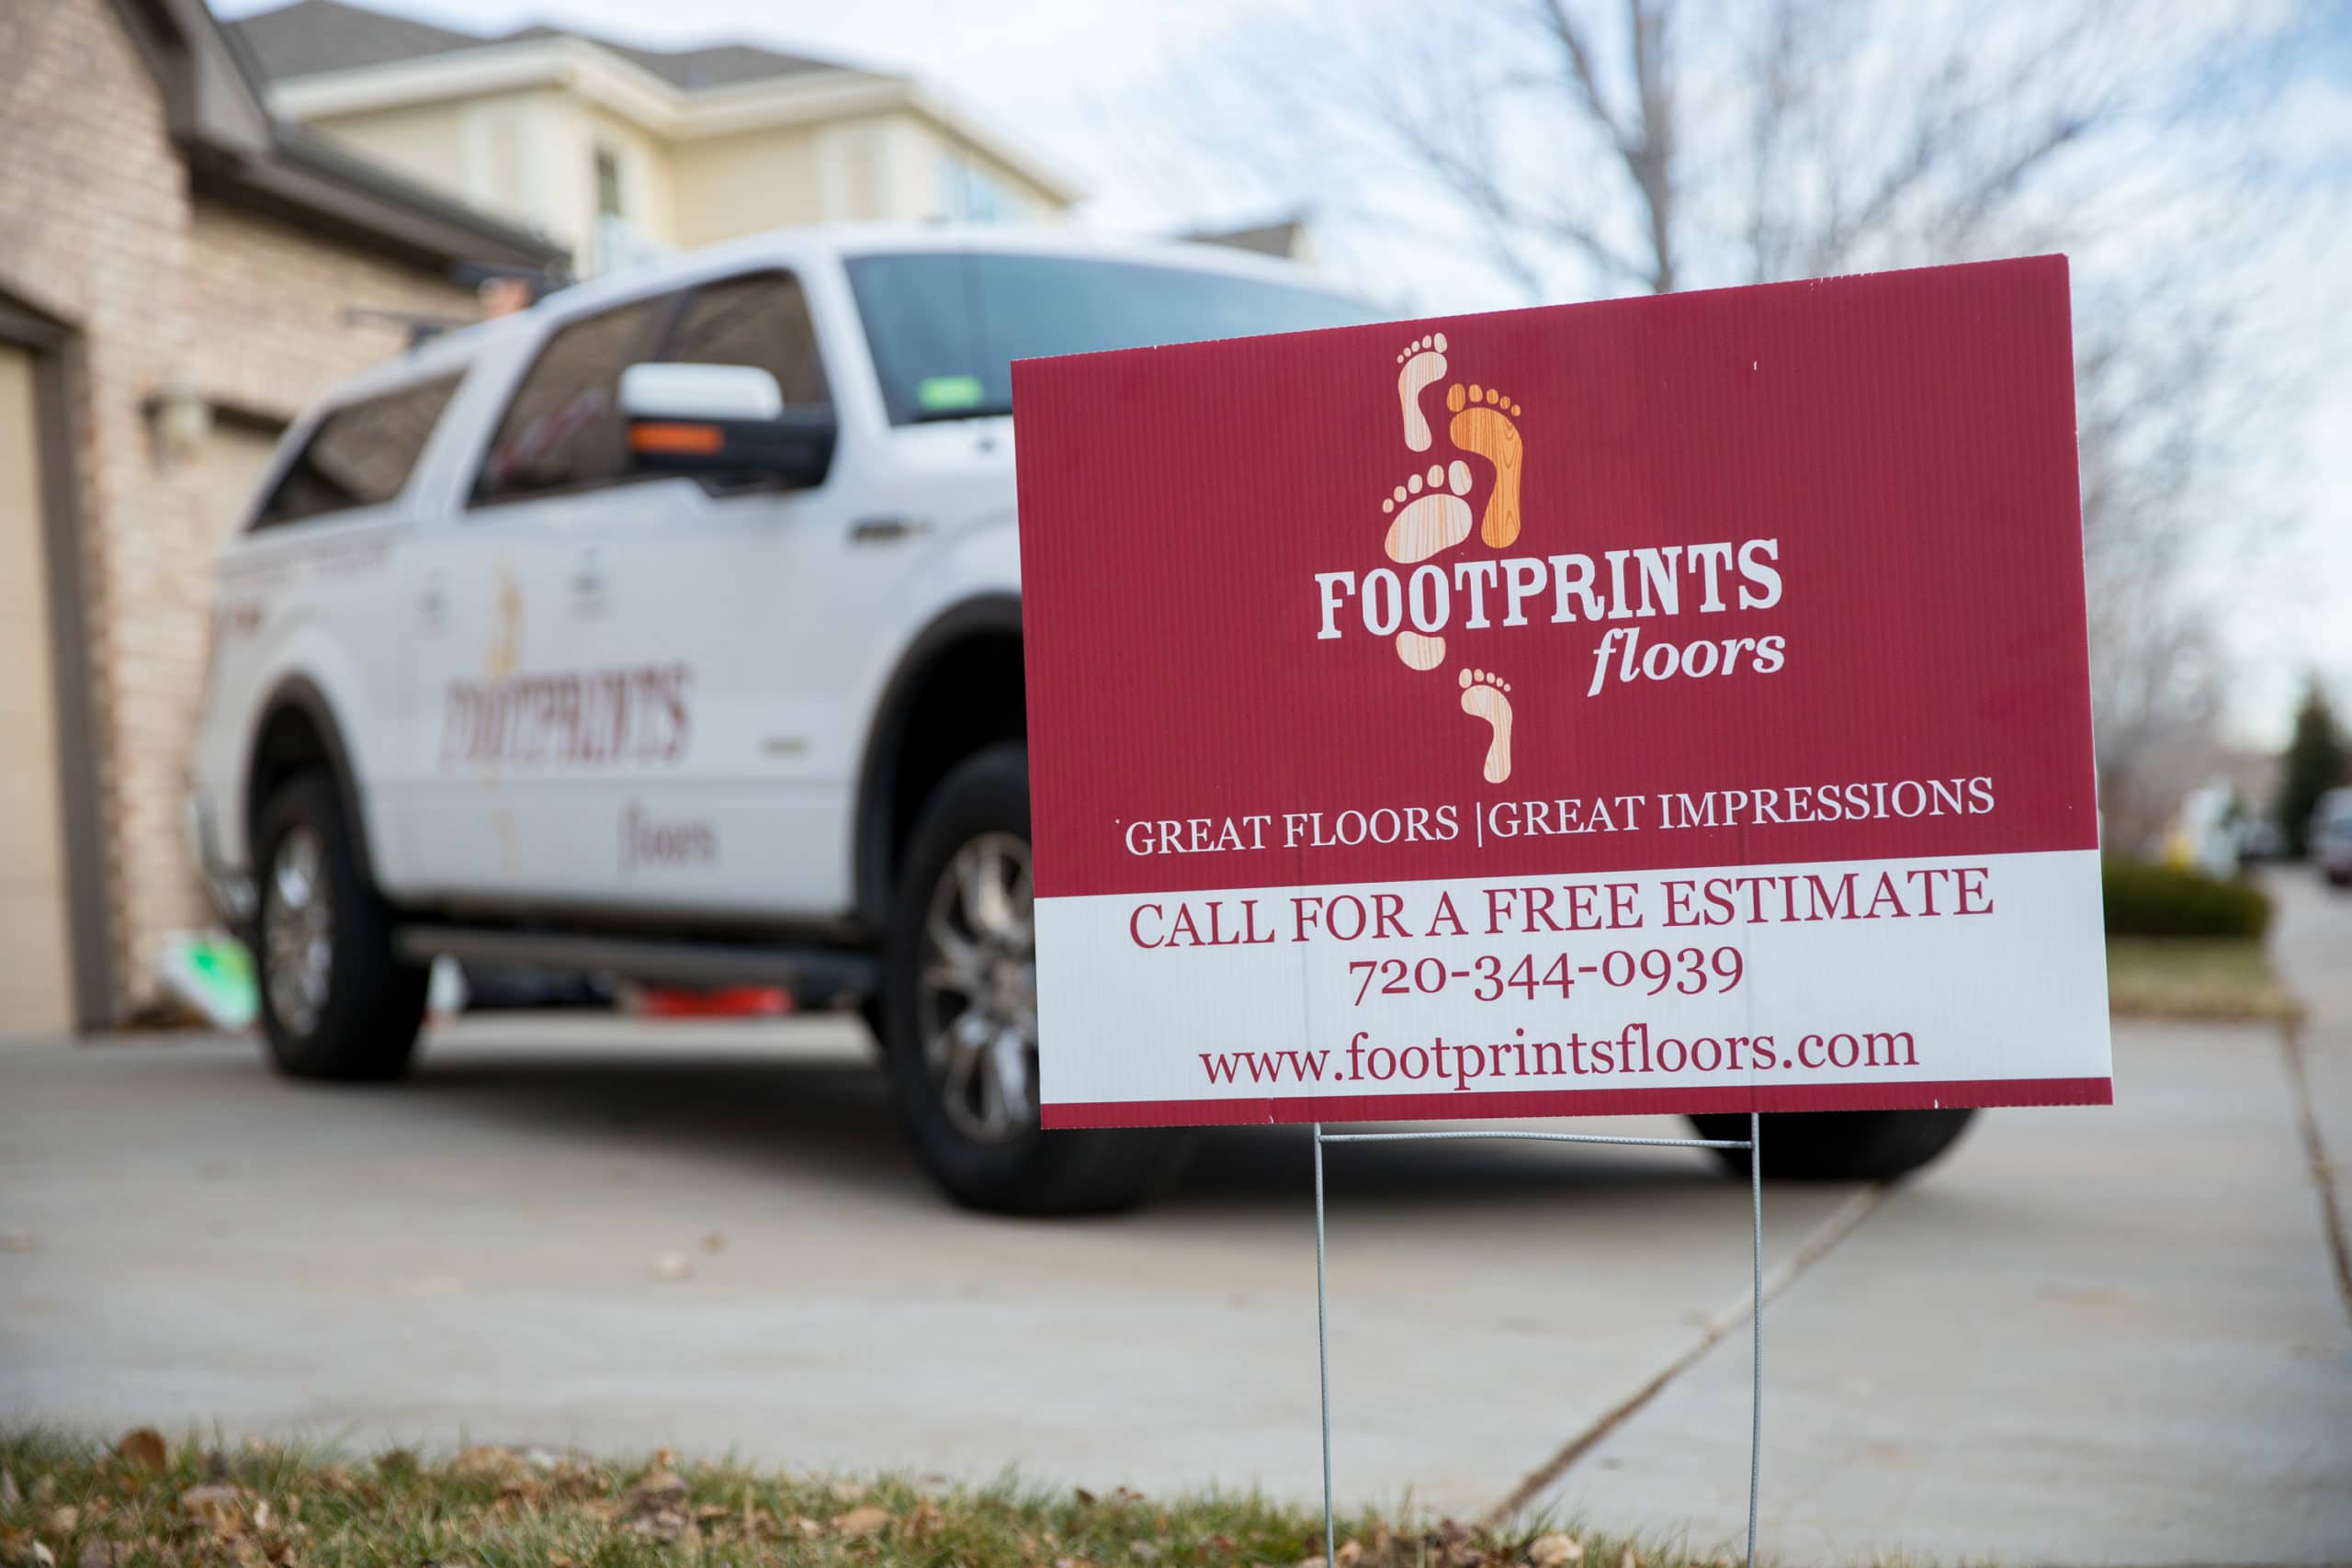 Footprints Floors provides many flooring business benefits, including lower startup costs.